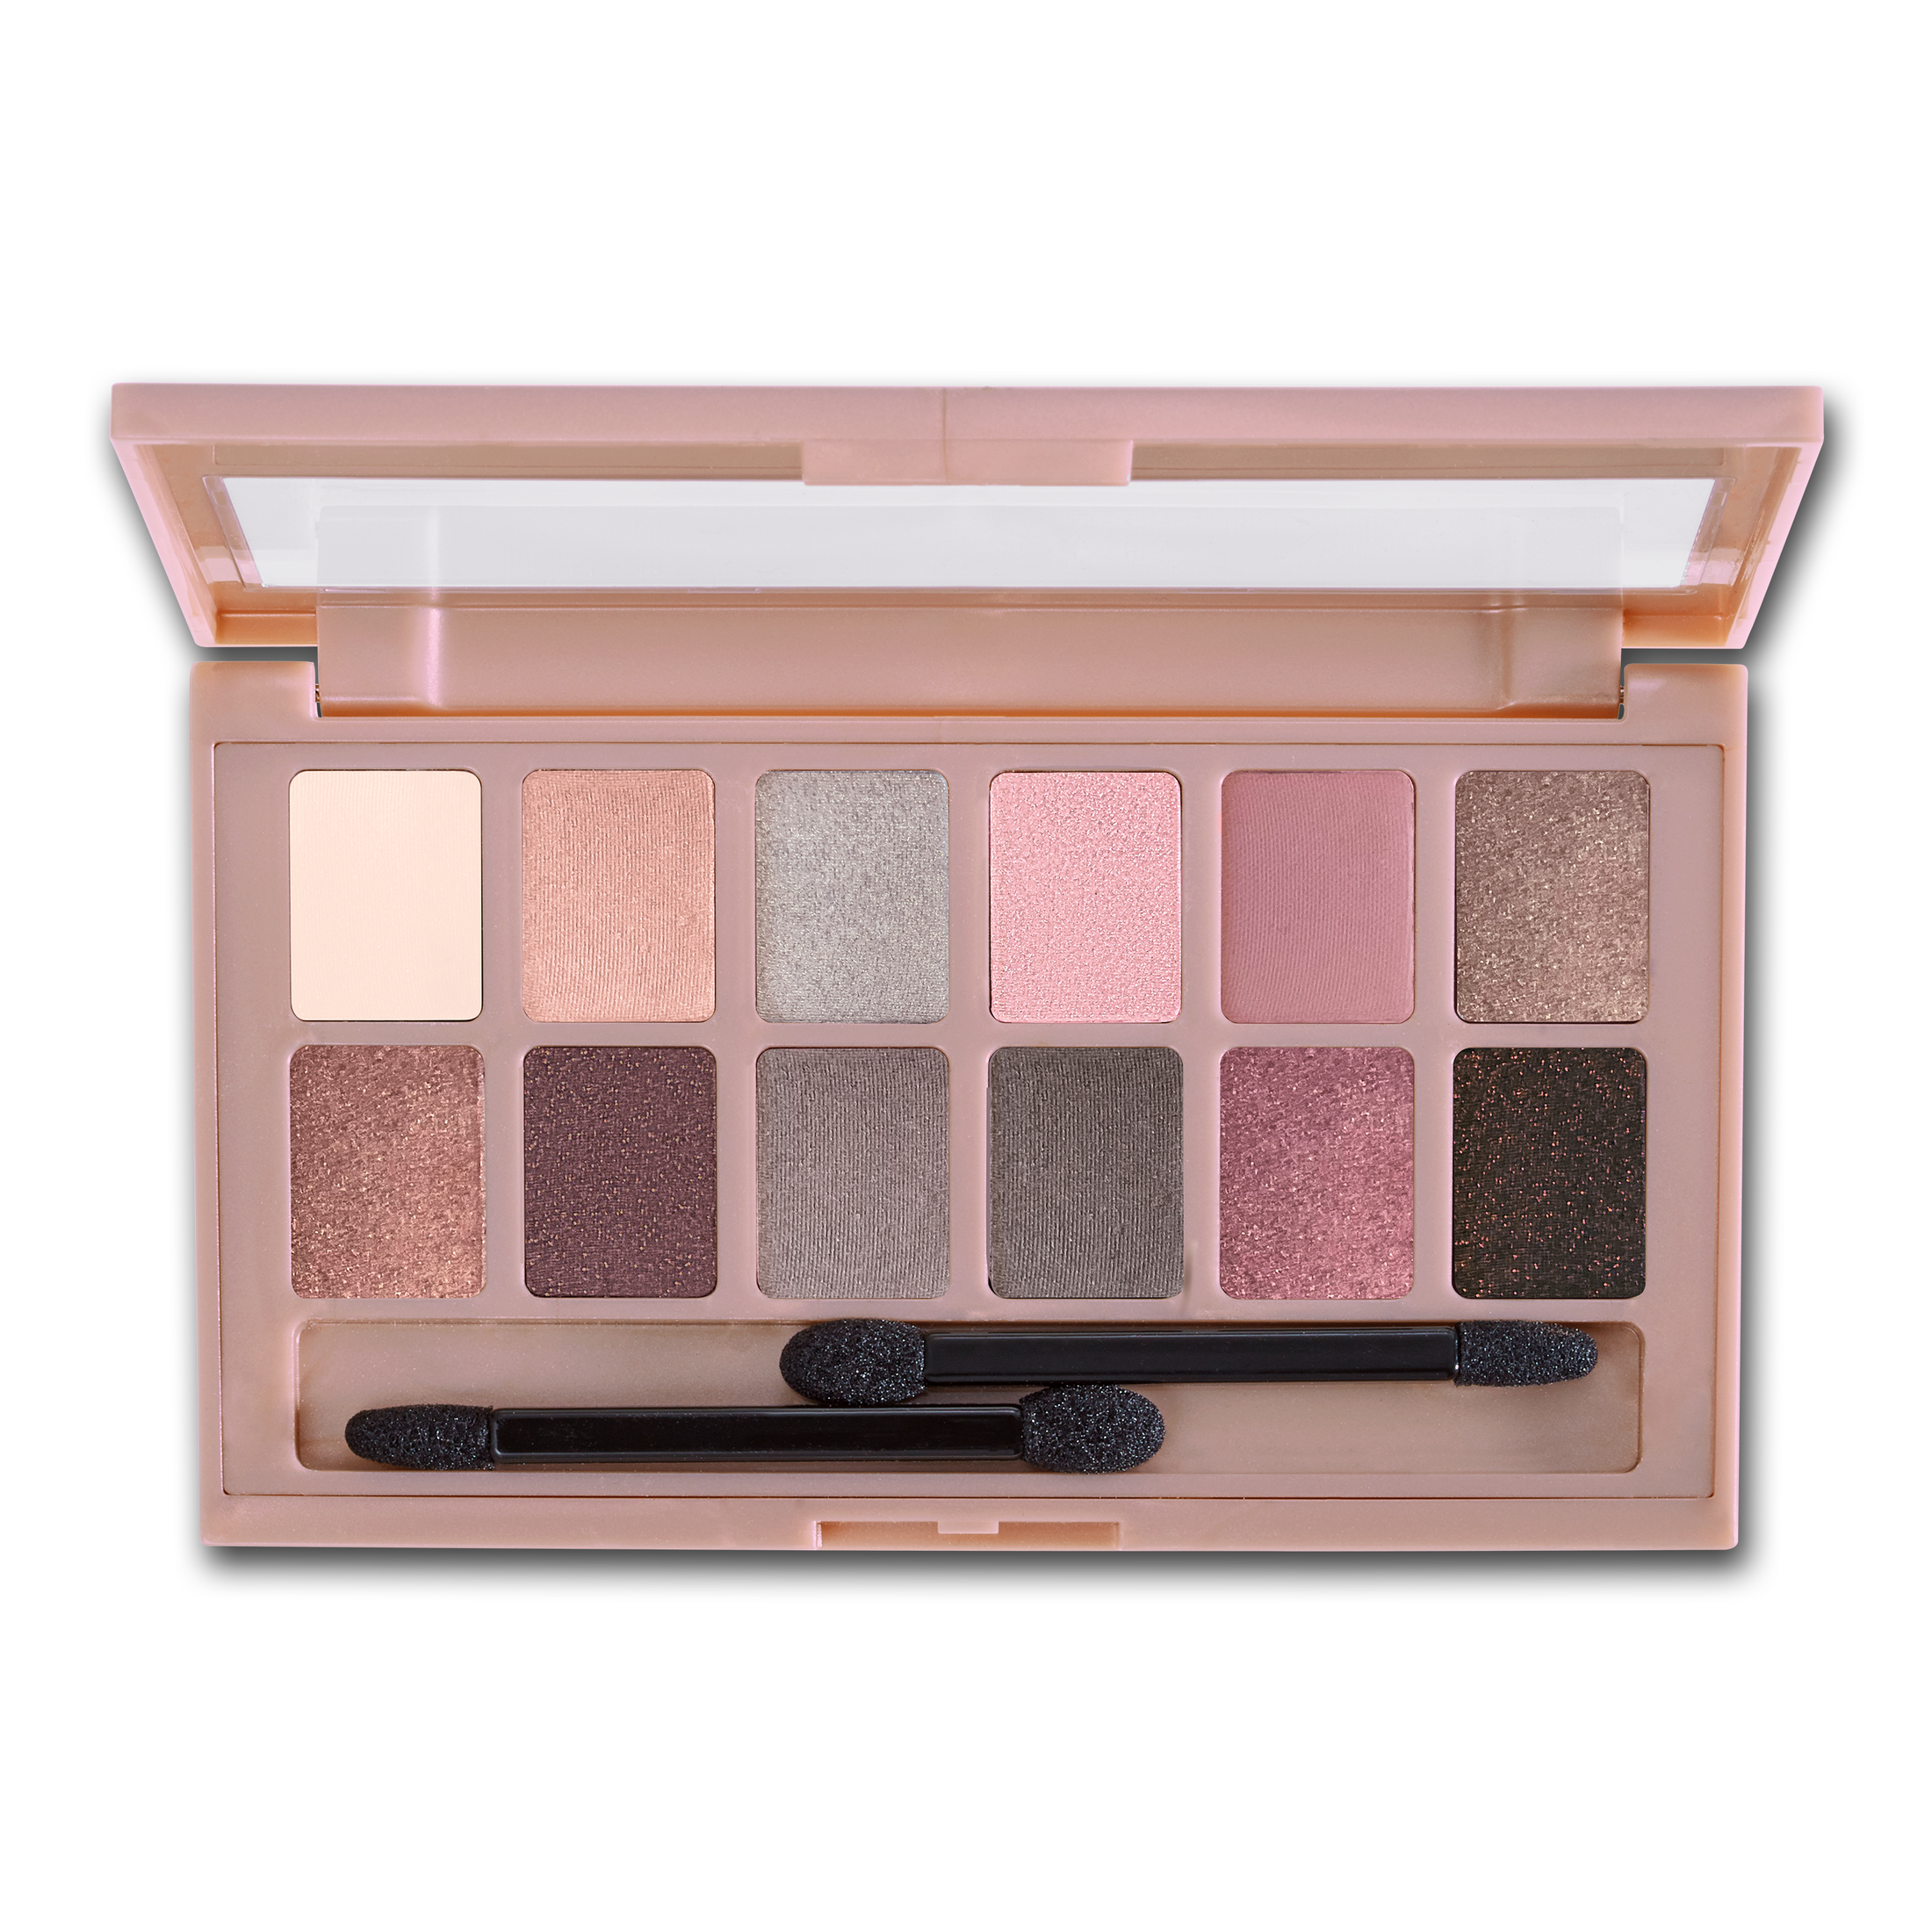 Maybelline The Blushed Nudes Eyeshadow Palette - image 3 of 7